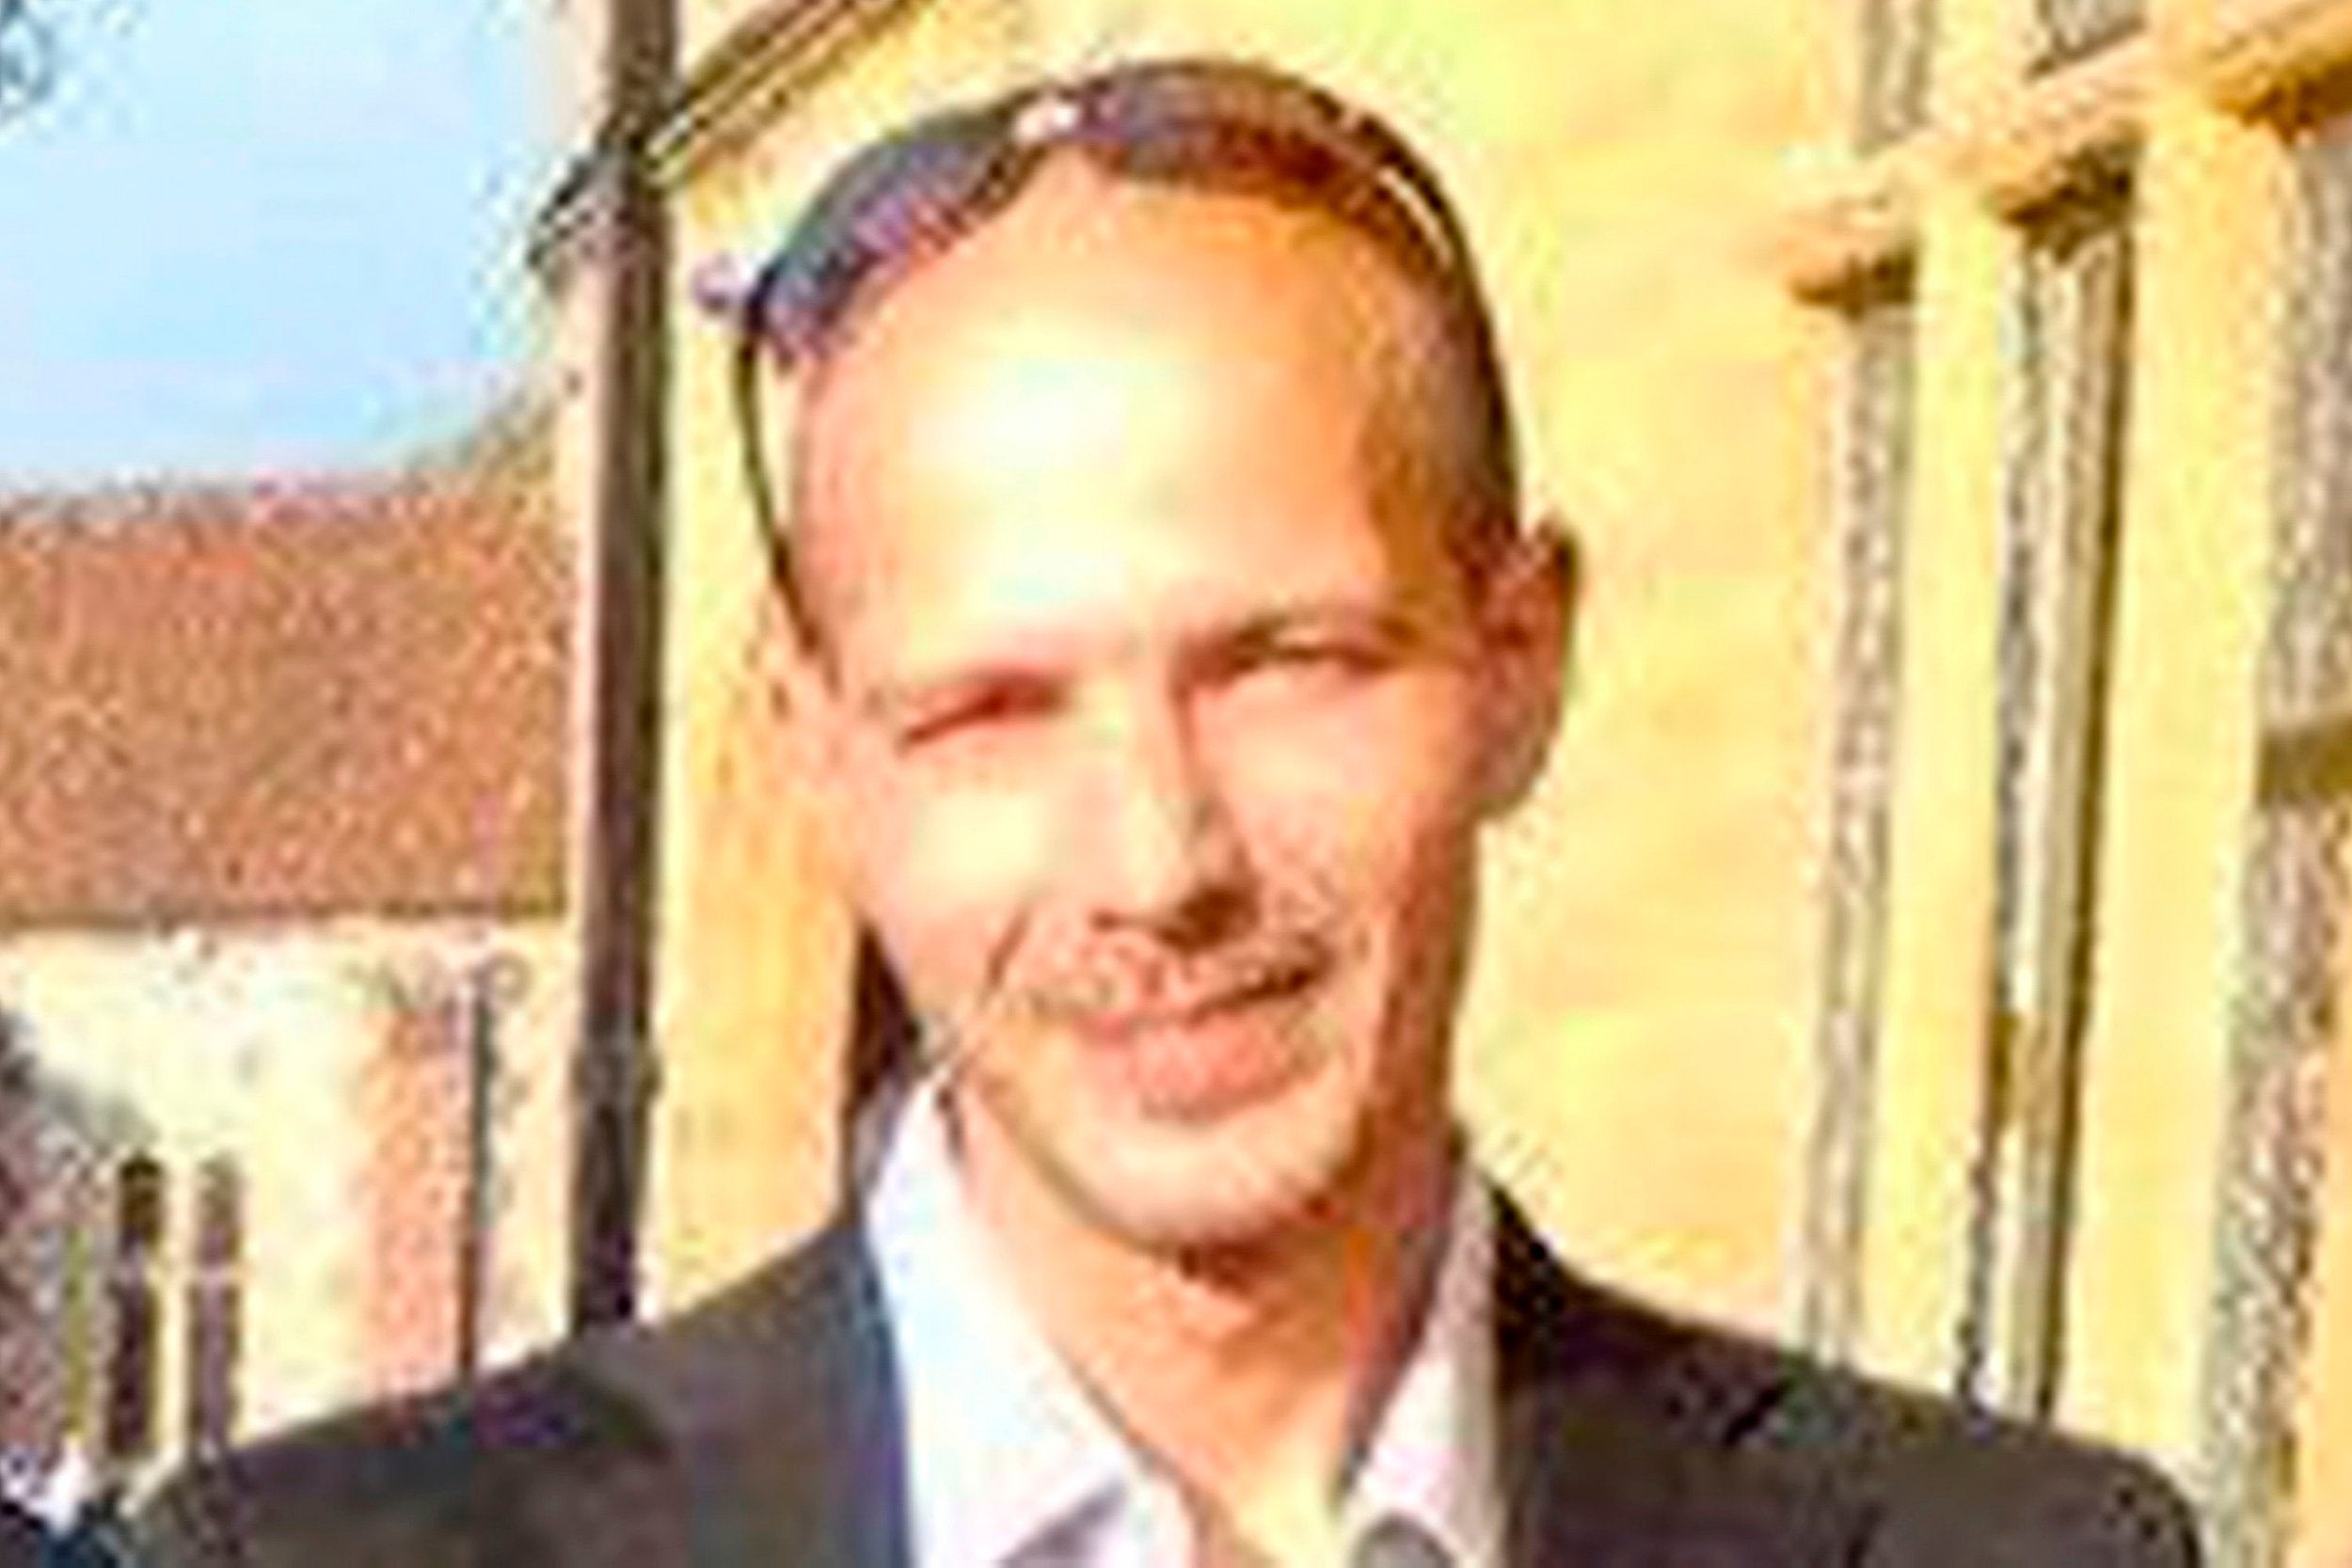 Amesbury novichok incident: Charlie Rowley released from hospital after nerve agent exposure